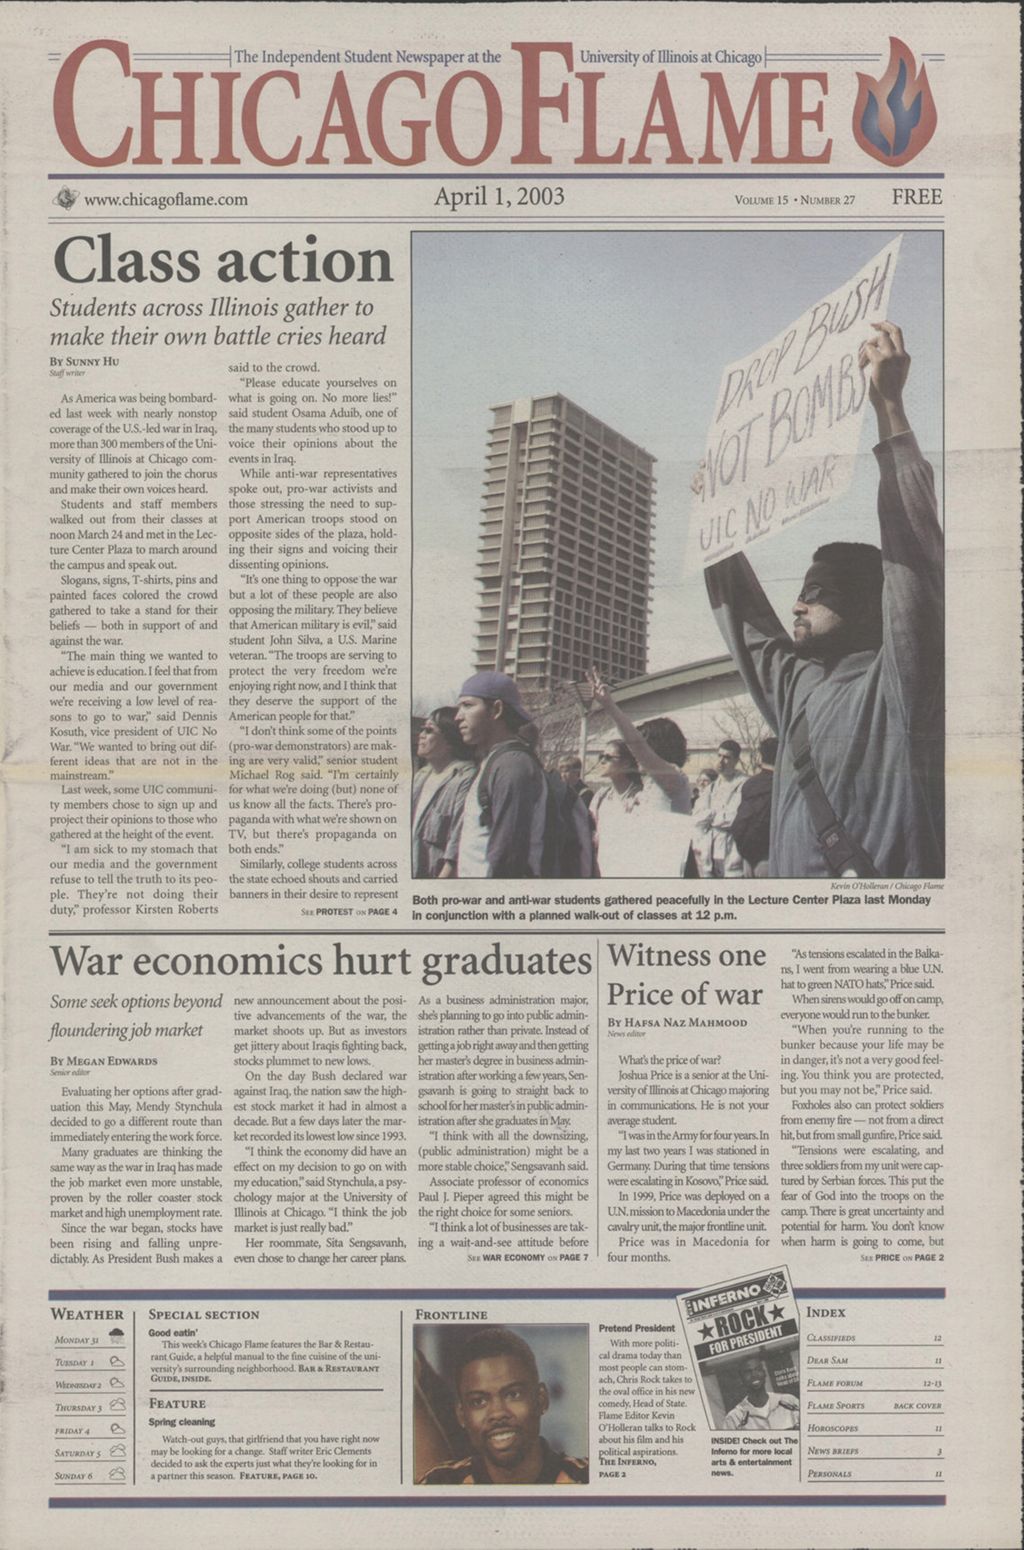 Chicago Flame (April 1, 2003)